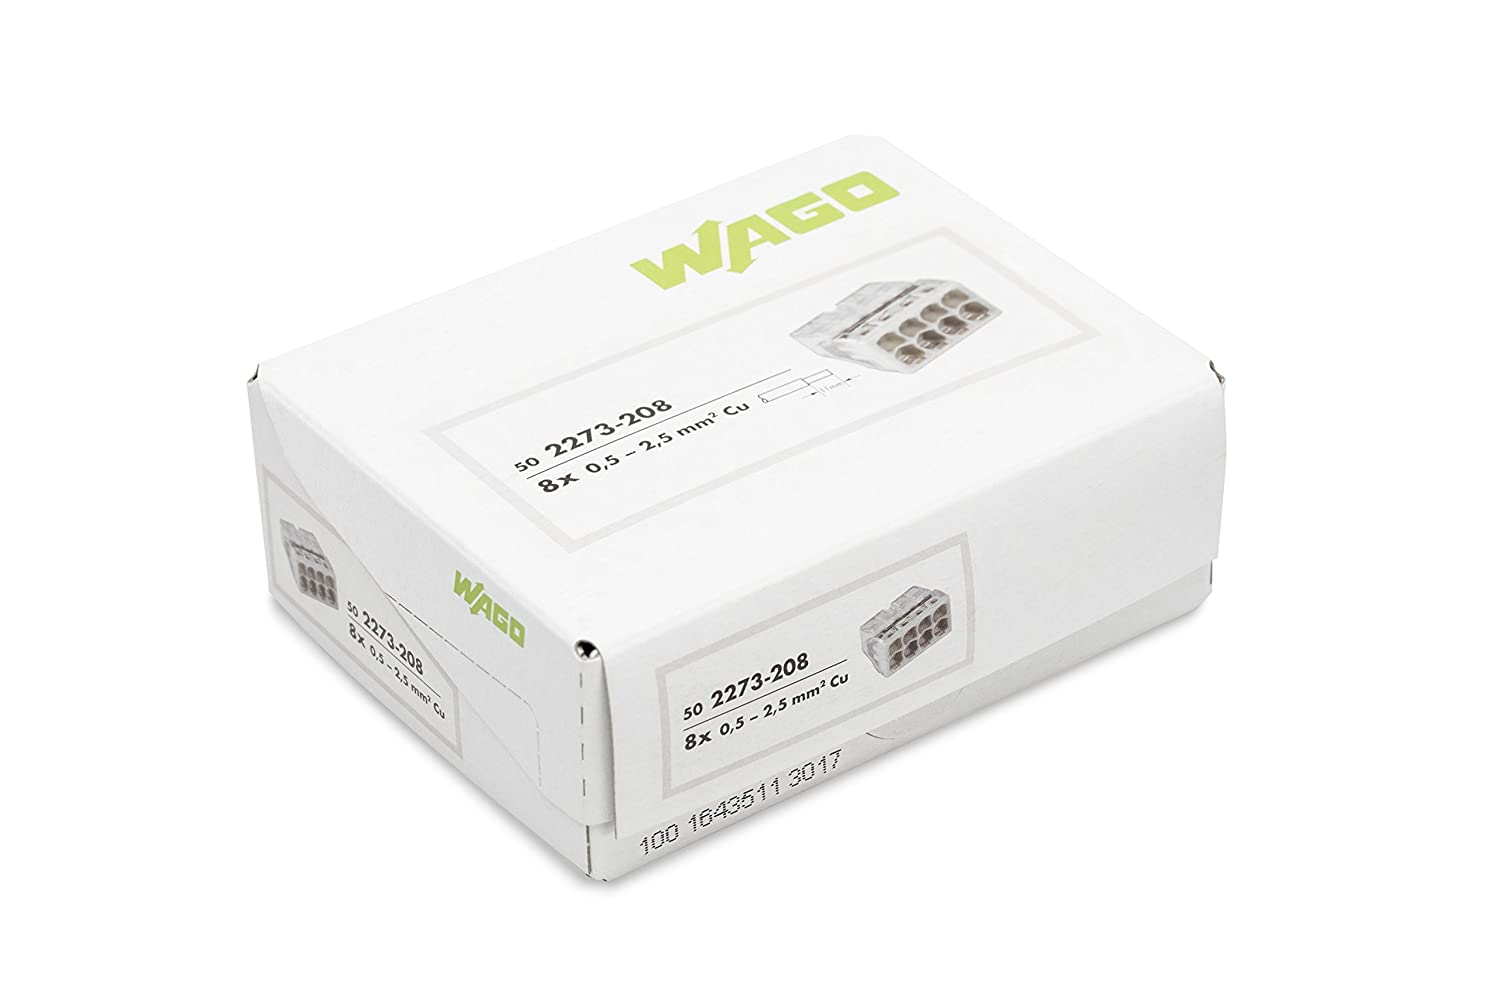 Pack of 50 | Wago 2273-208 Connecting terminal 0.5-2.5 mm²